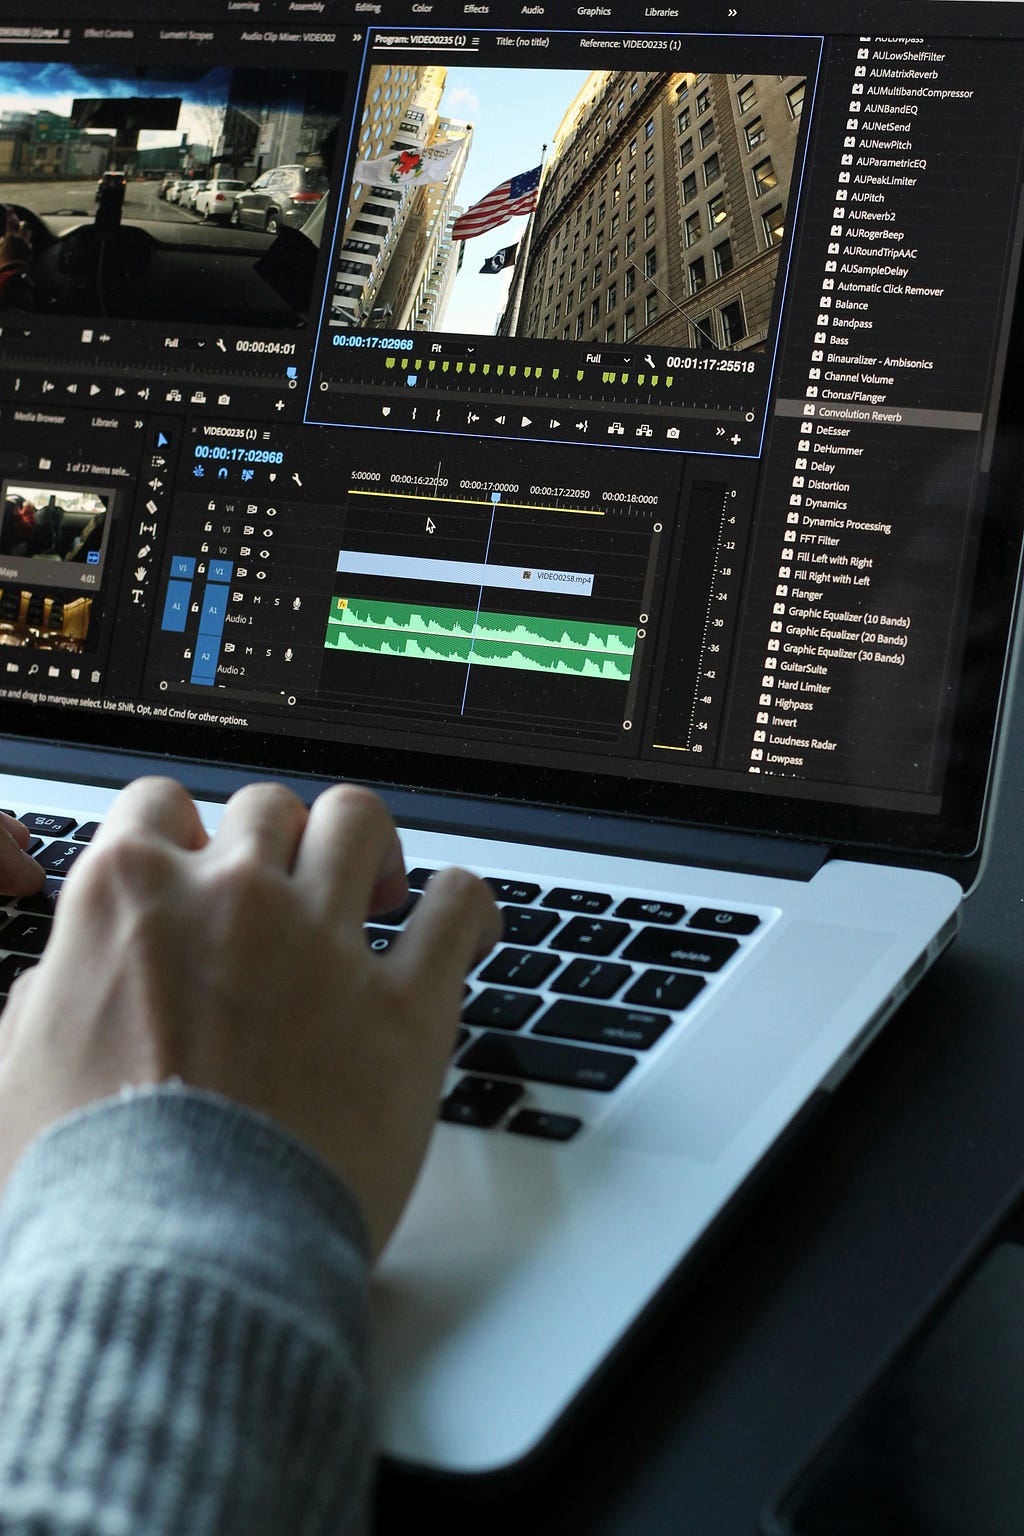 10 Awesome Video Editing Tips for Beginners (Make Your Videos Shine!)